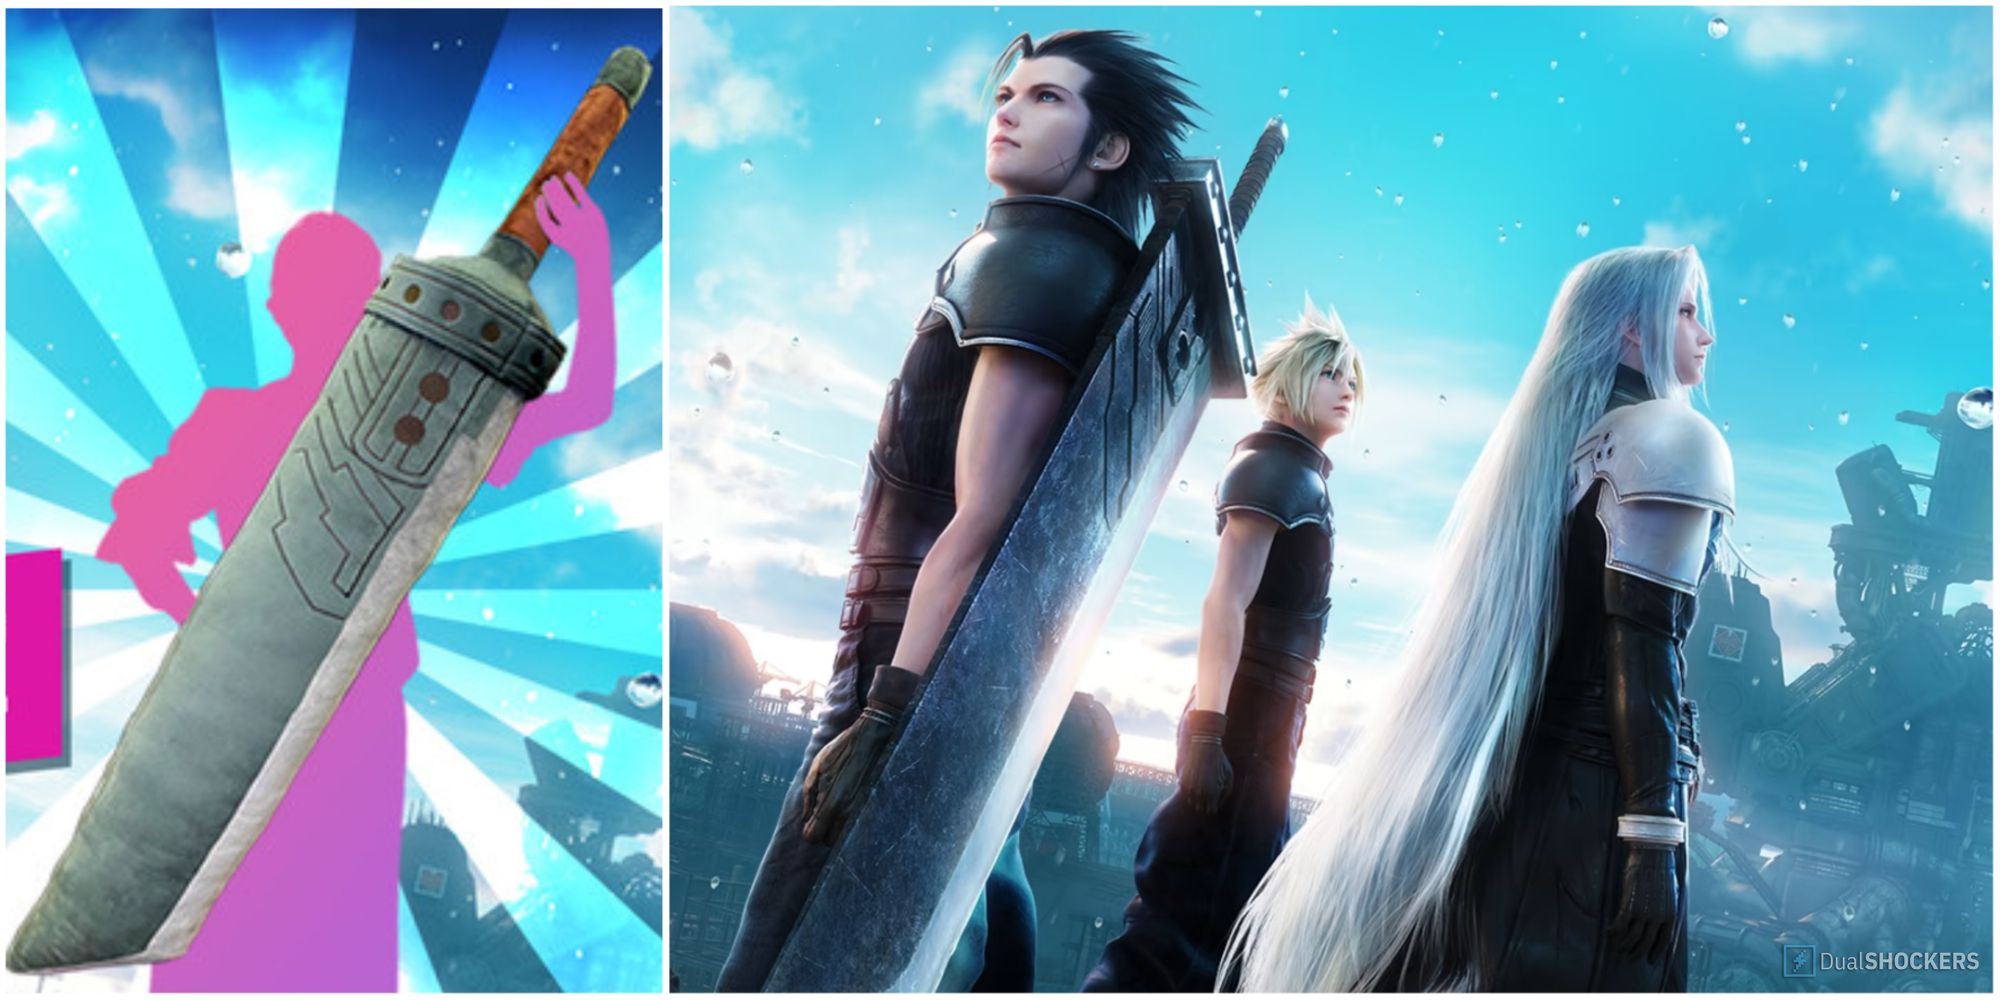 Banner image showing the life-sized plush Buster Sword Square-Enix is giving away as a contest prize, next to an image of Zack, Cloud, and Sephiroth from Crisis Core Final Fantasy VII Reunion